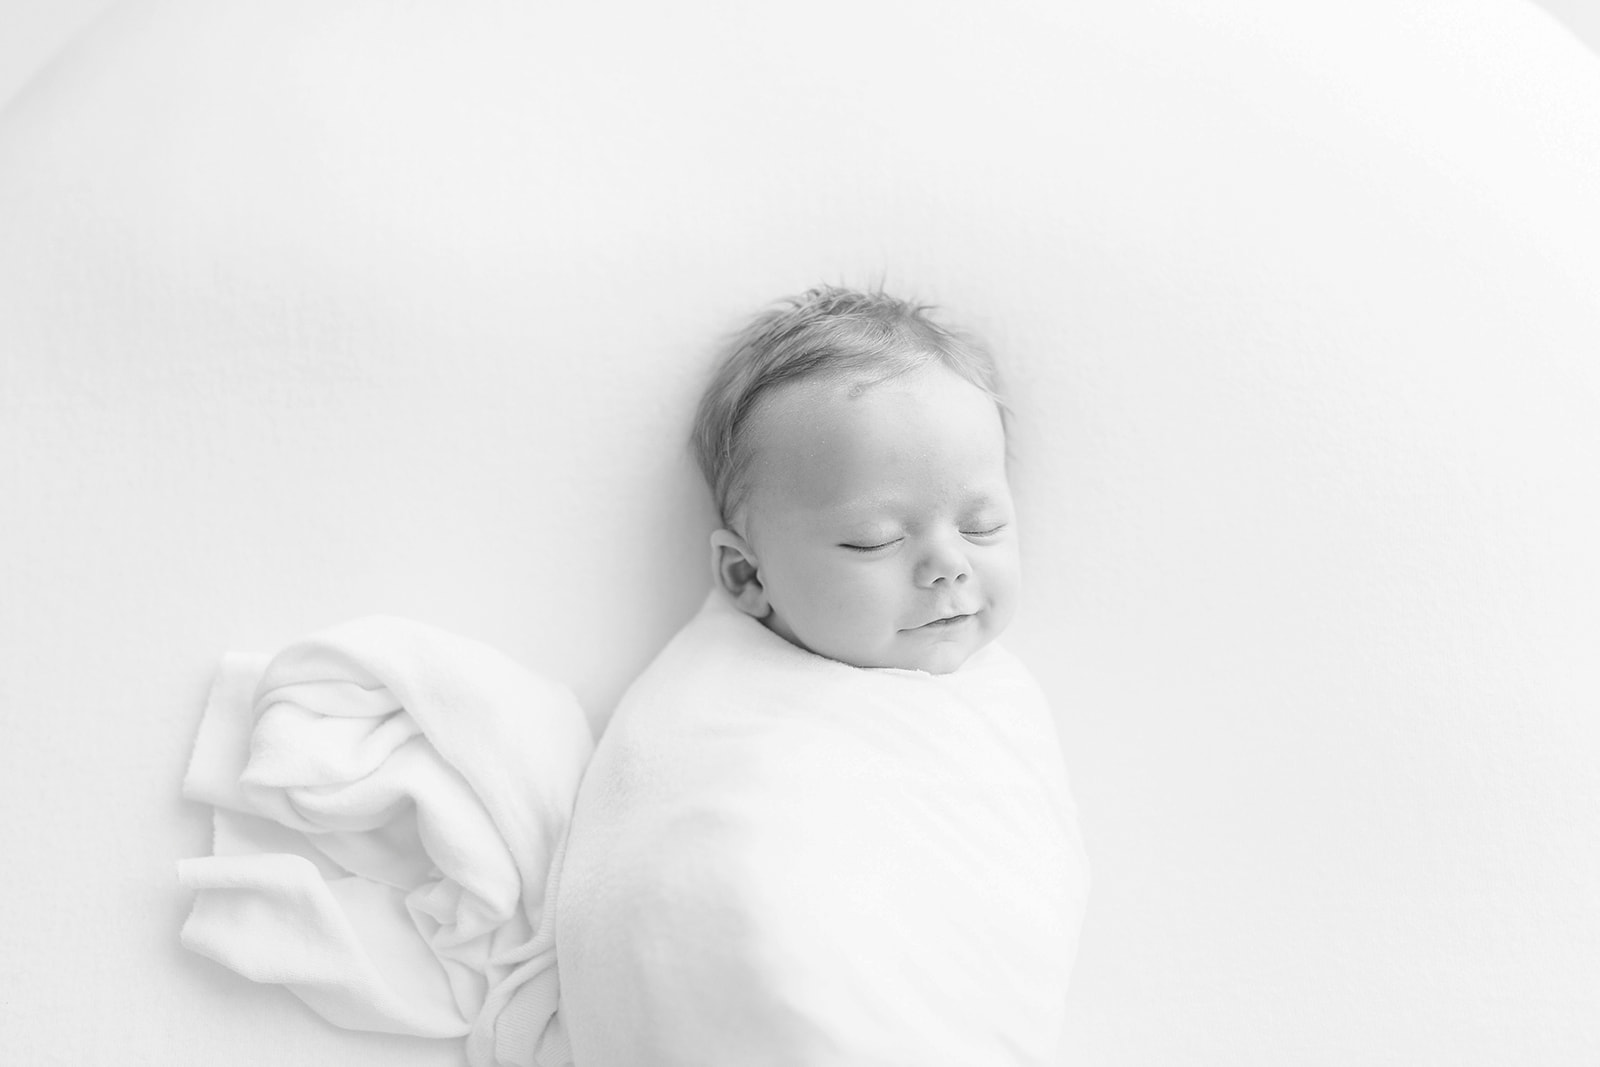 A newborn baby sleeps with a smile in a white swaddle